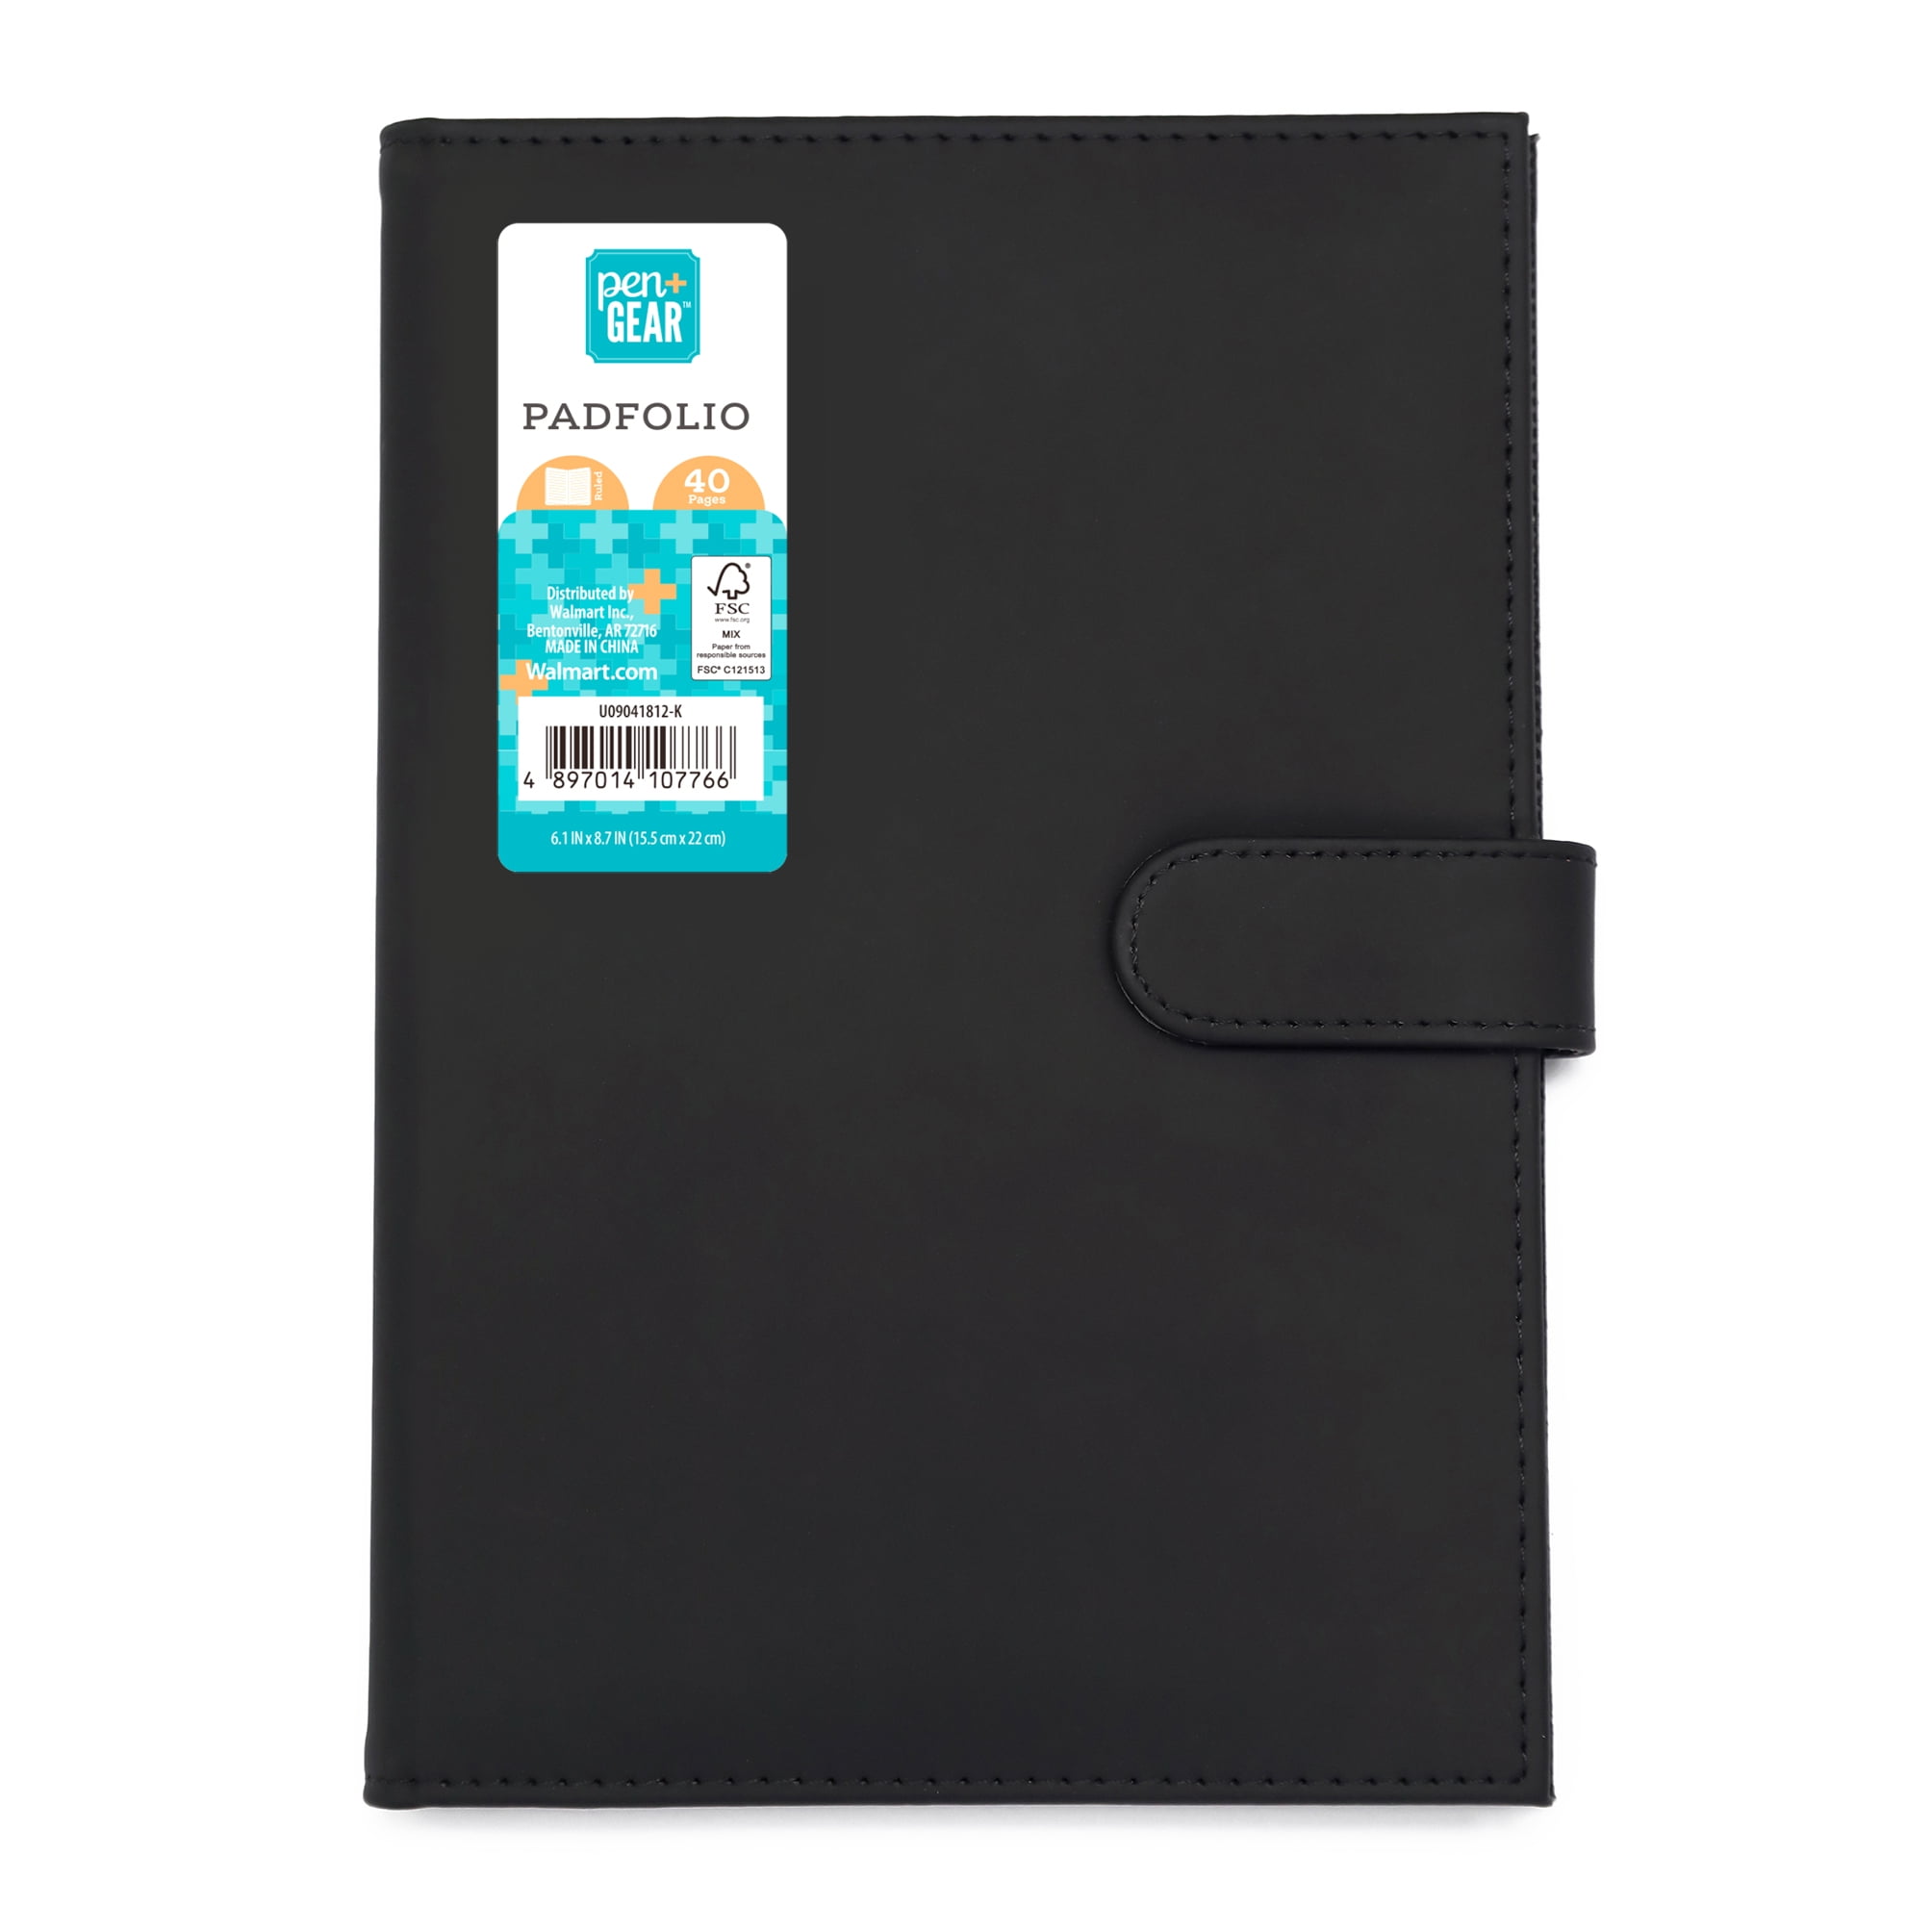 Pen+Gear Small Leatherette Padfolio, Black Color, Lined Paper Writing Pad